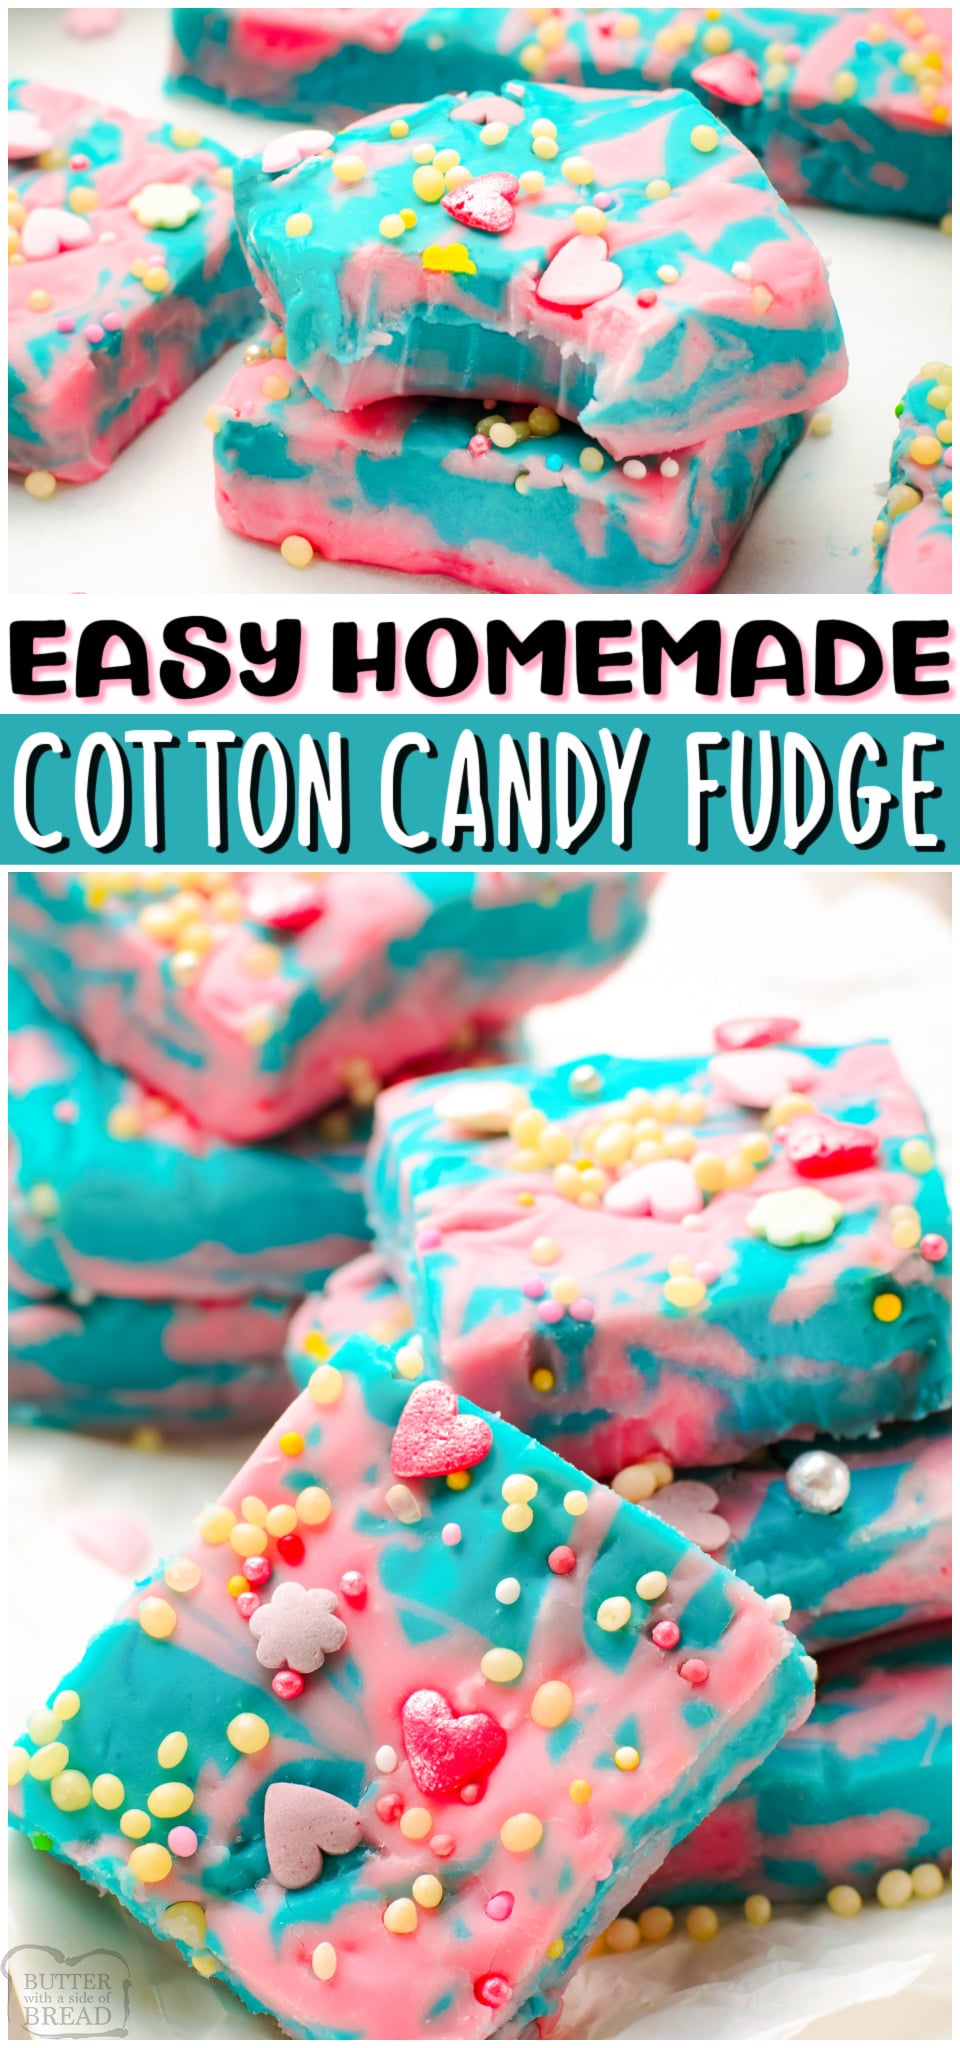 Cotton candy fudge made fun with white chocolate chips and condensed milk! Swirled fudge recipe with cotton candy flavor and topped with festive sprinkles! 